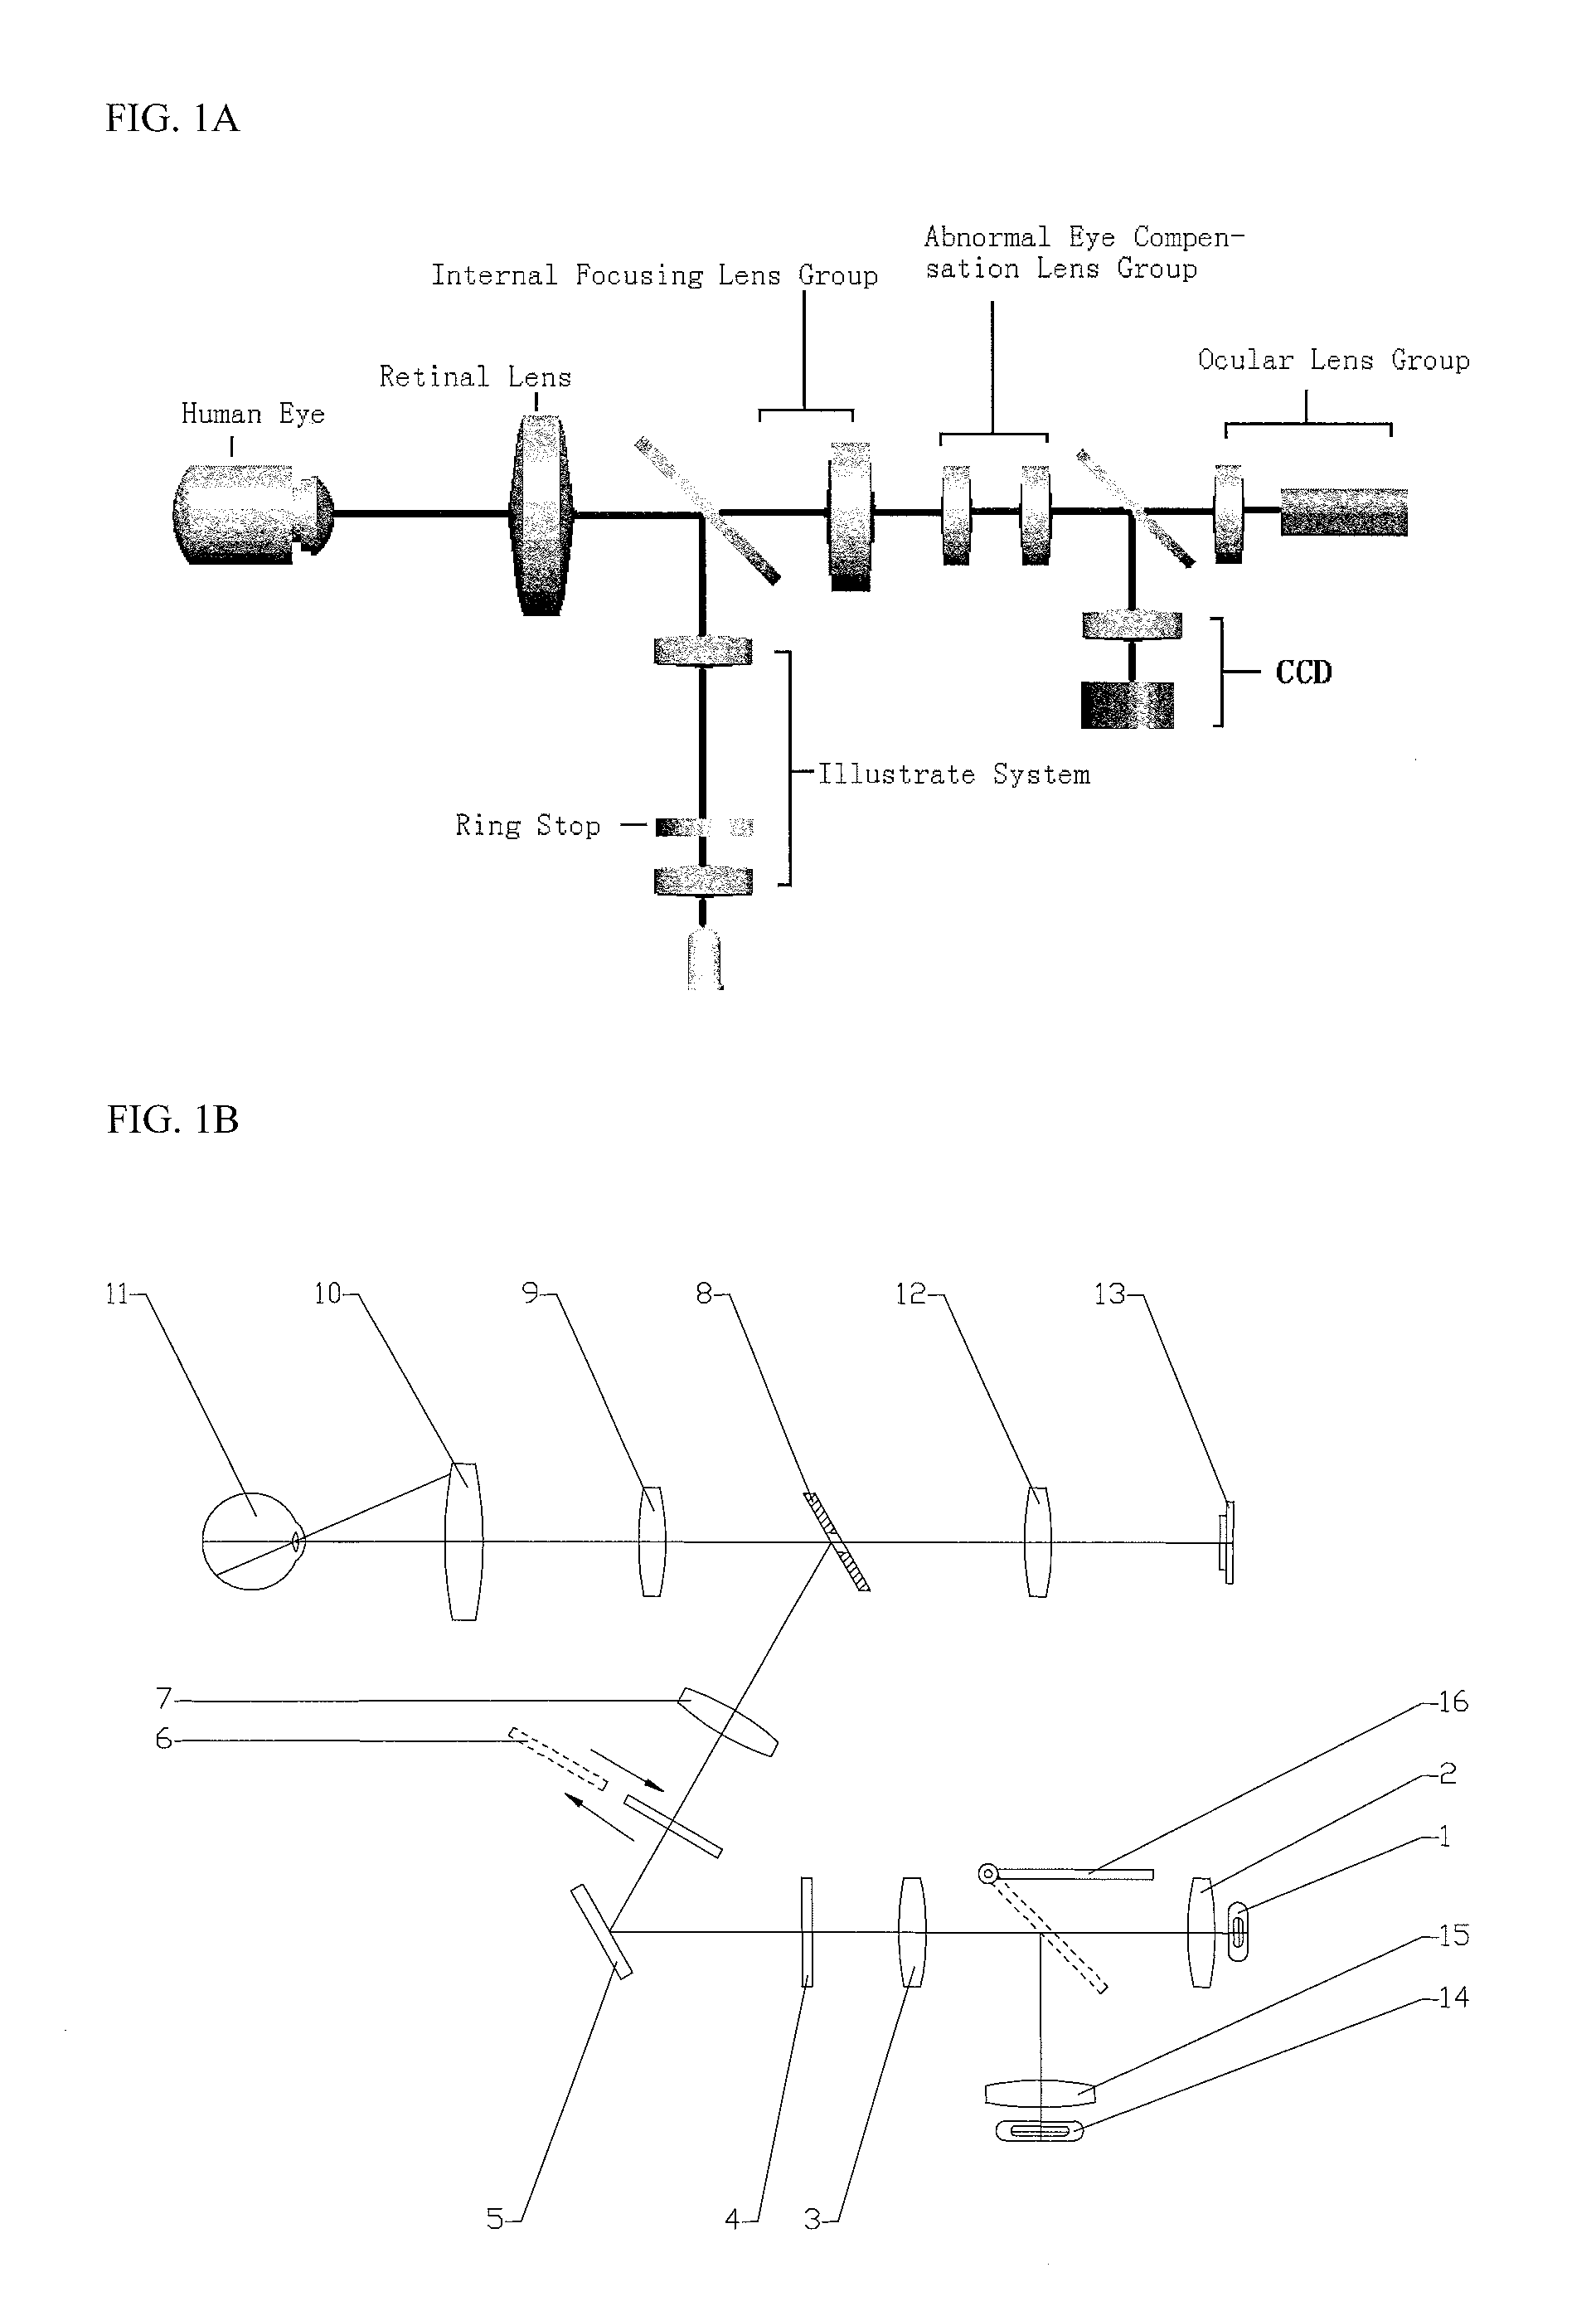 Apparatus and method for non-invasive diabetic retinopathy detection and monitoring